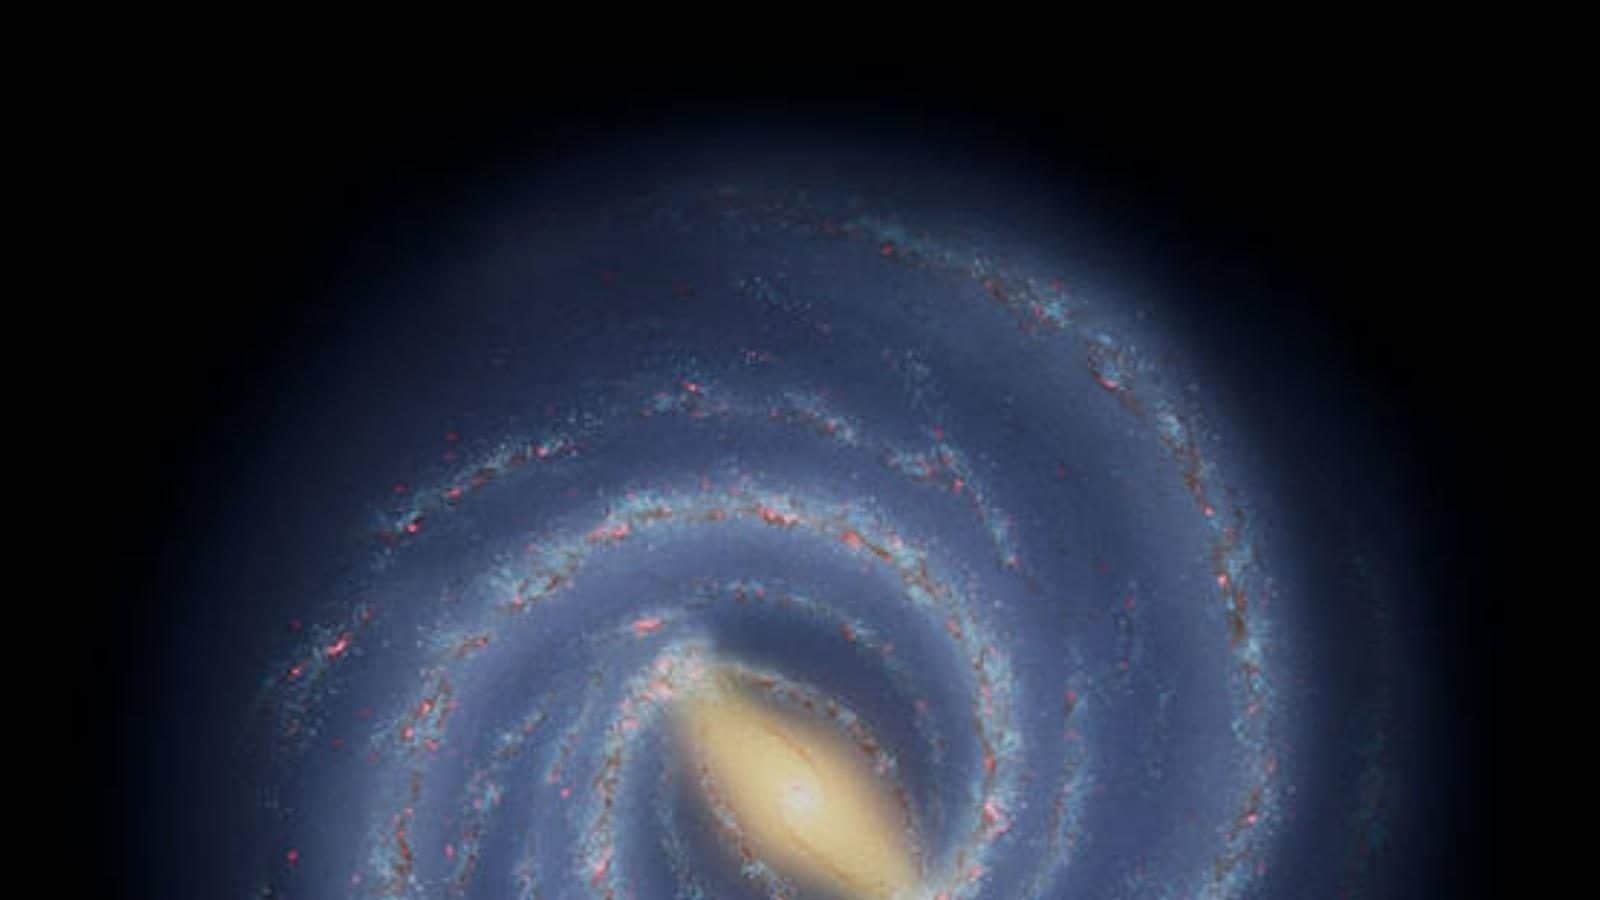 Astronomers Find a 'Break' in One of the Milky Way's Spiral Arms